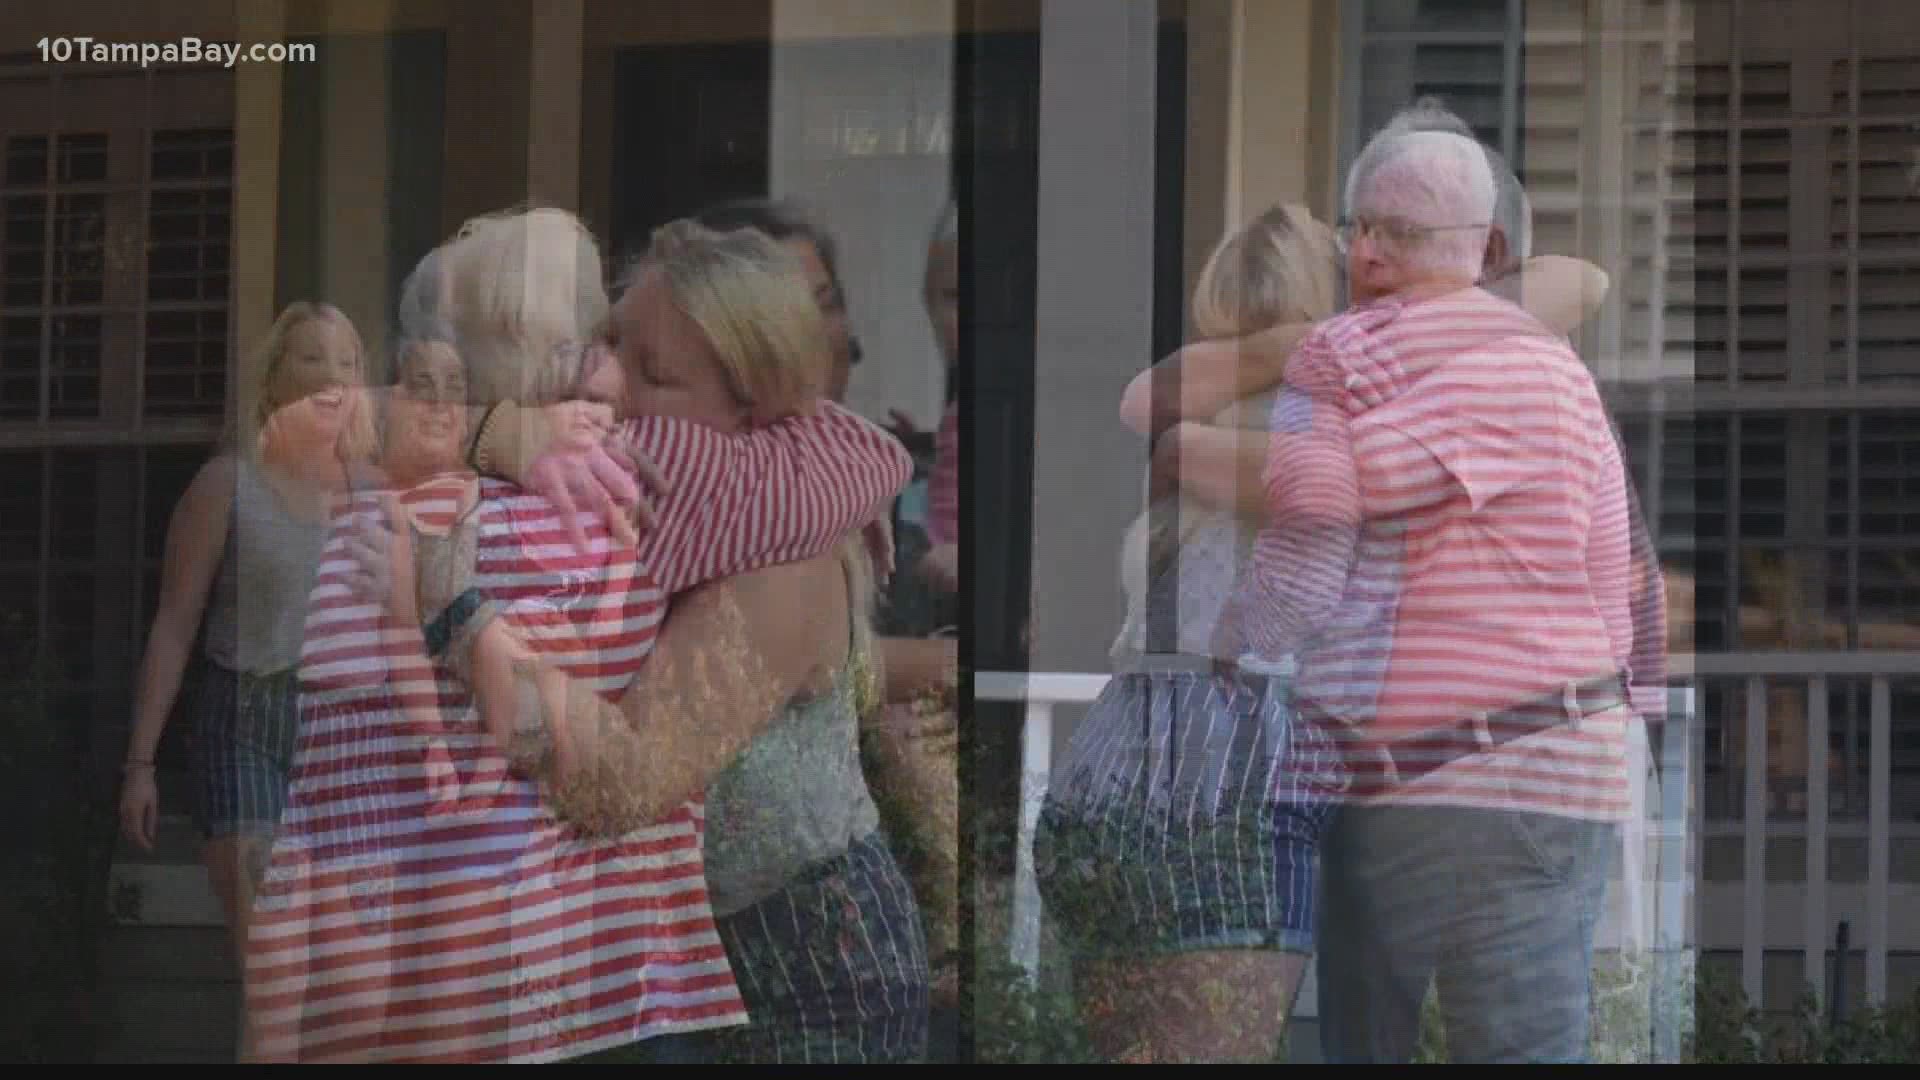 Rebecca Hook sought out her birth mother this spring 27 years after being adopted. They reconnected and Hook finally met her grandparents Oct. 16 in Tampa.